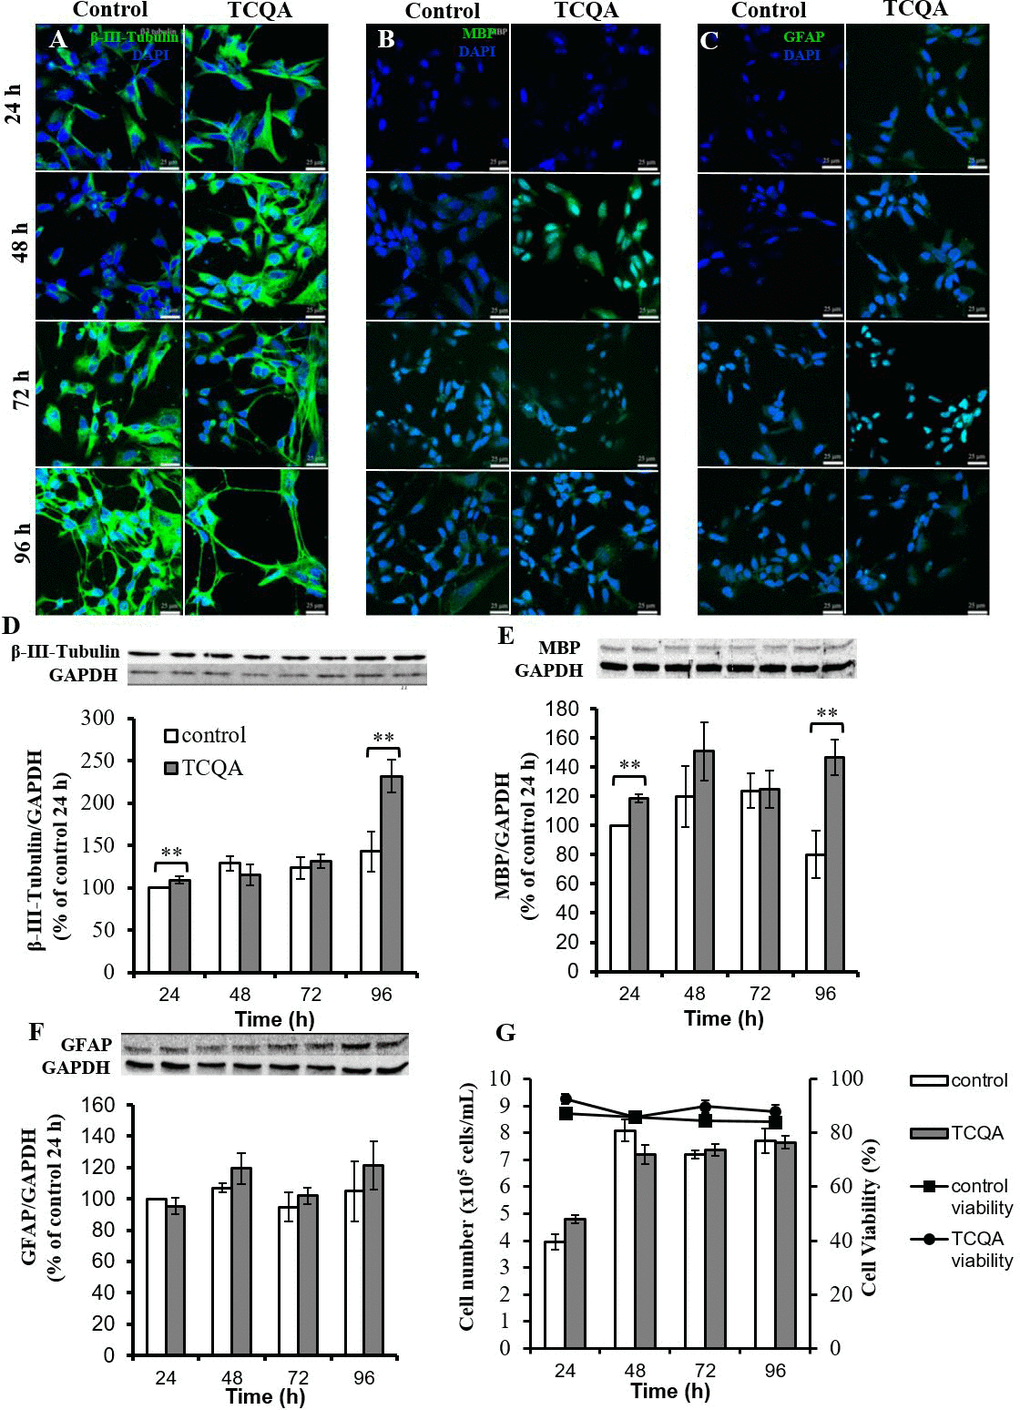 The effect of 3,4,5-tricaffeoylquinic acid (TCQA) on fate, protein expression levels of differentiation markers, and cell proliferation of human neural stem cells (hNSCs)